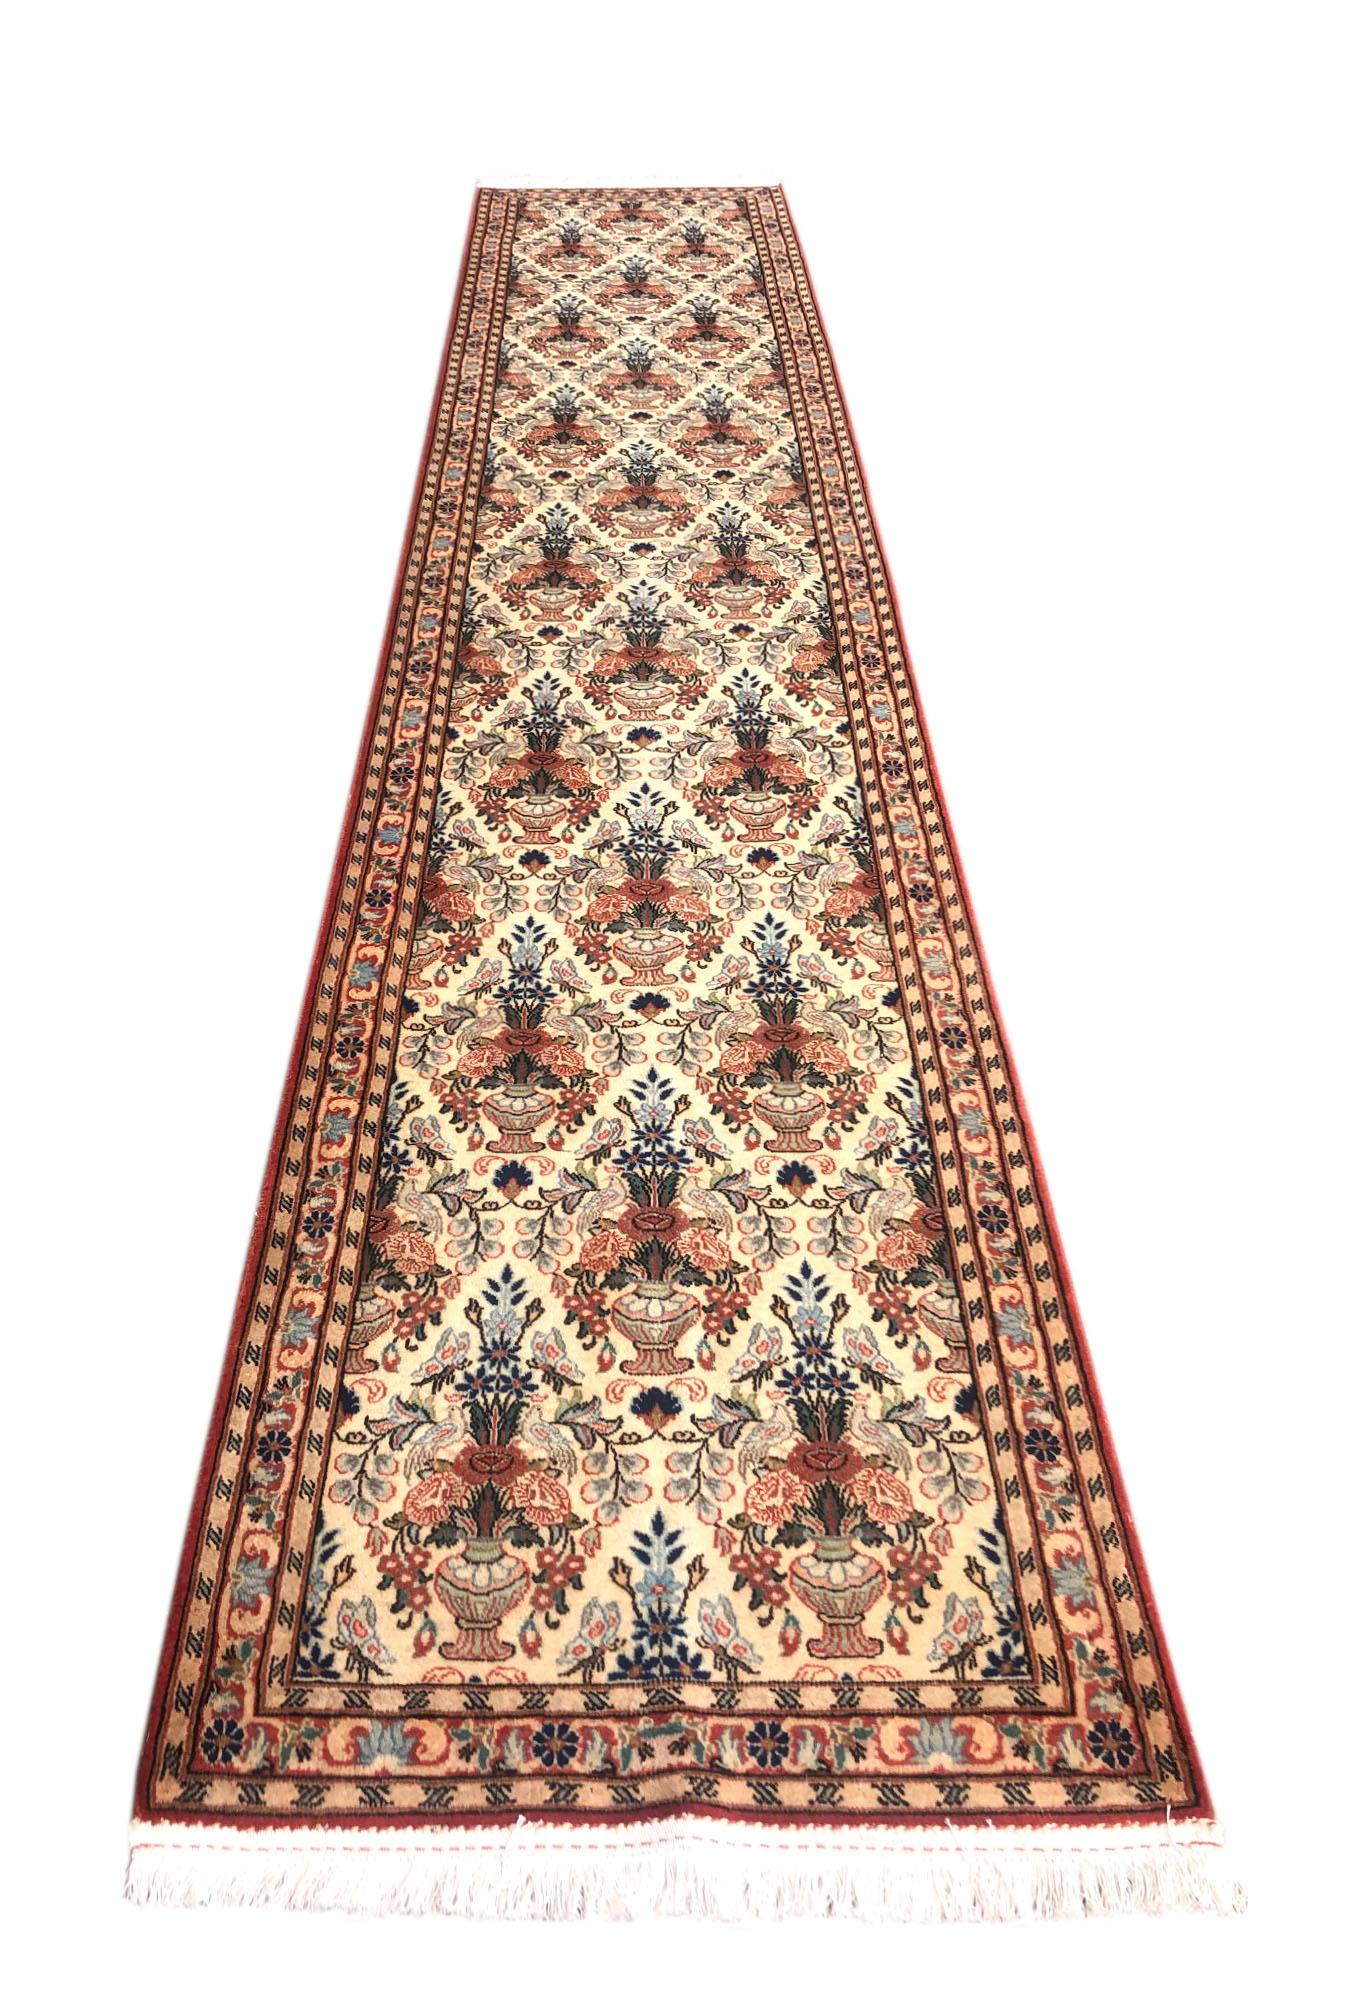 This is beautiful authentic Persian Qum runner, has a dramatic all-over floral vase design woven onto a cream background with a cream border. This pile is wool & silk on a cotton foundation. Dimensions are approximately size 2 feet 6 inch wide by 12